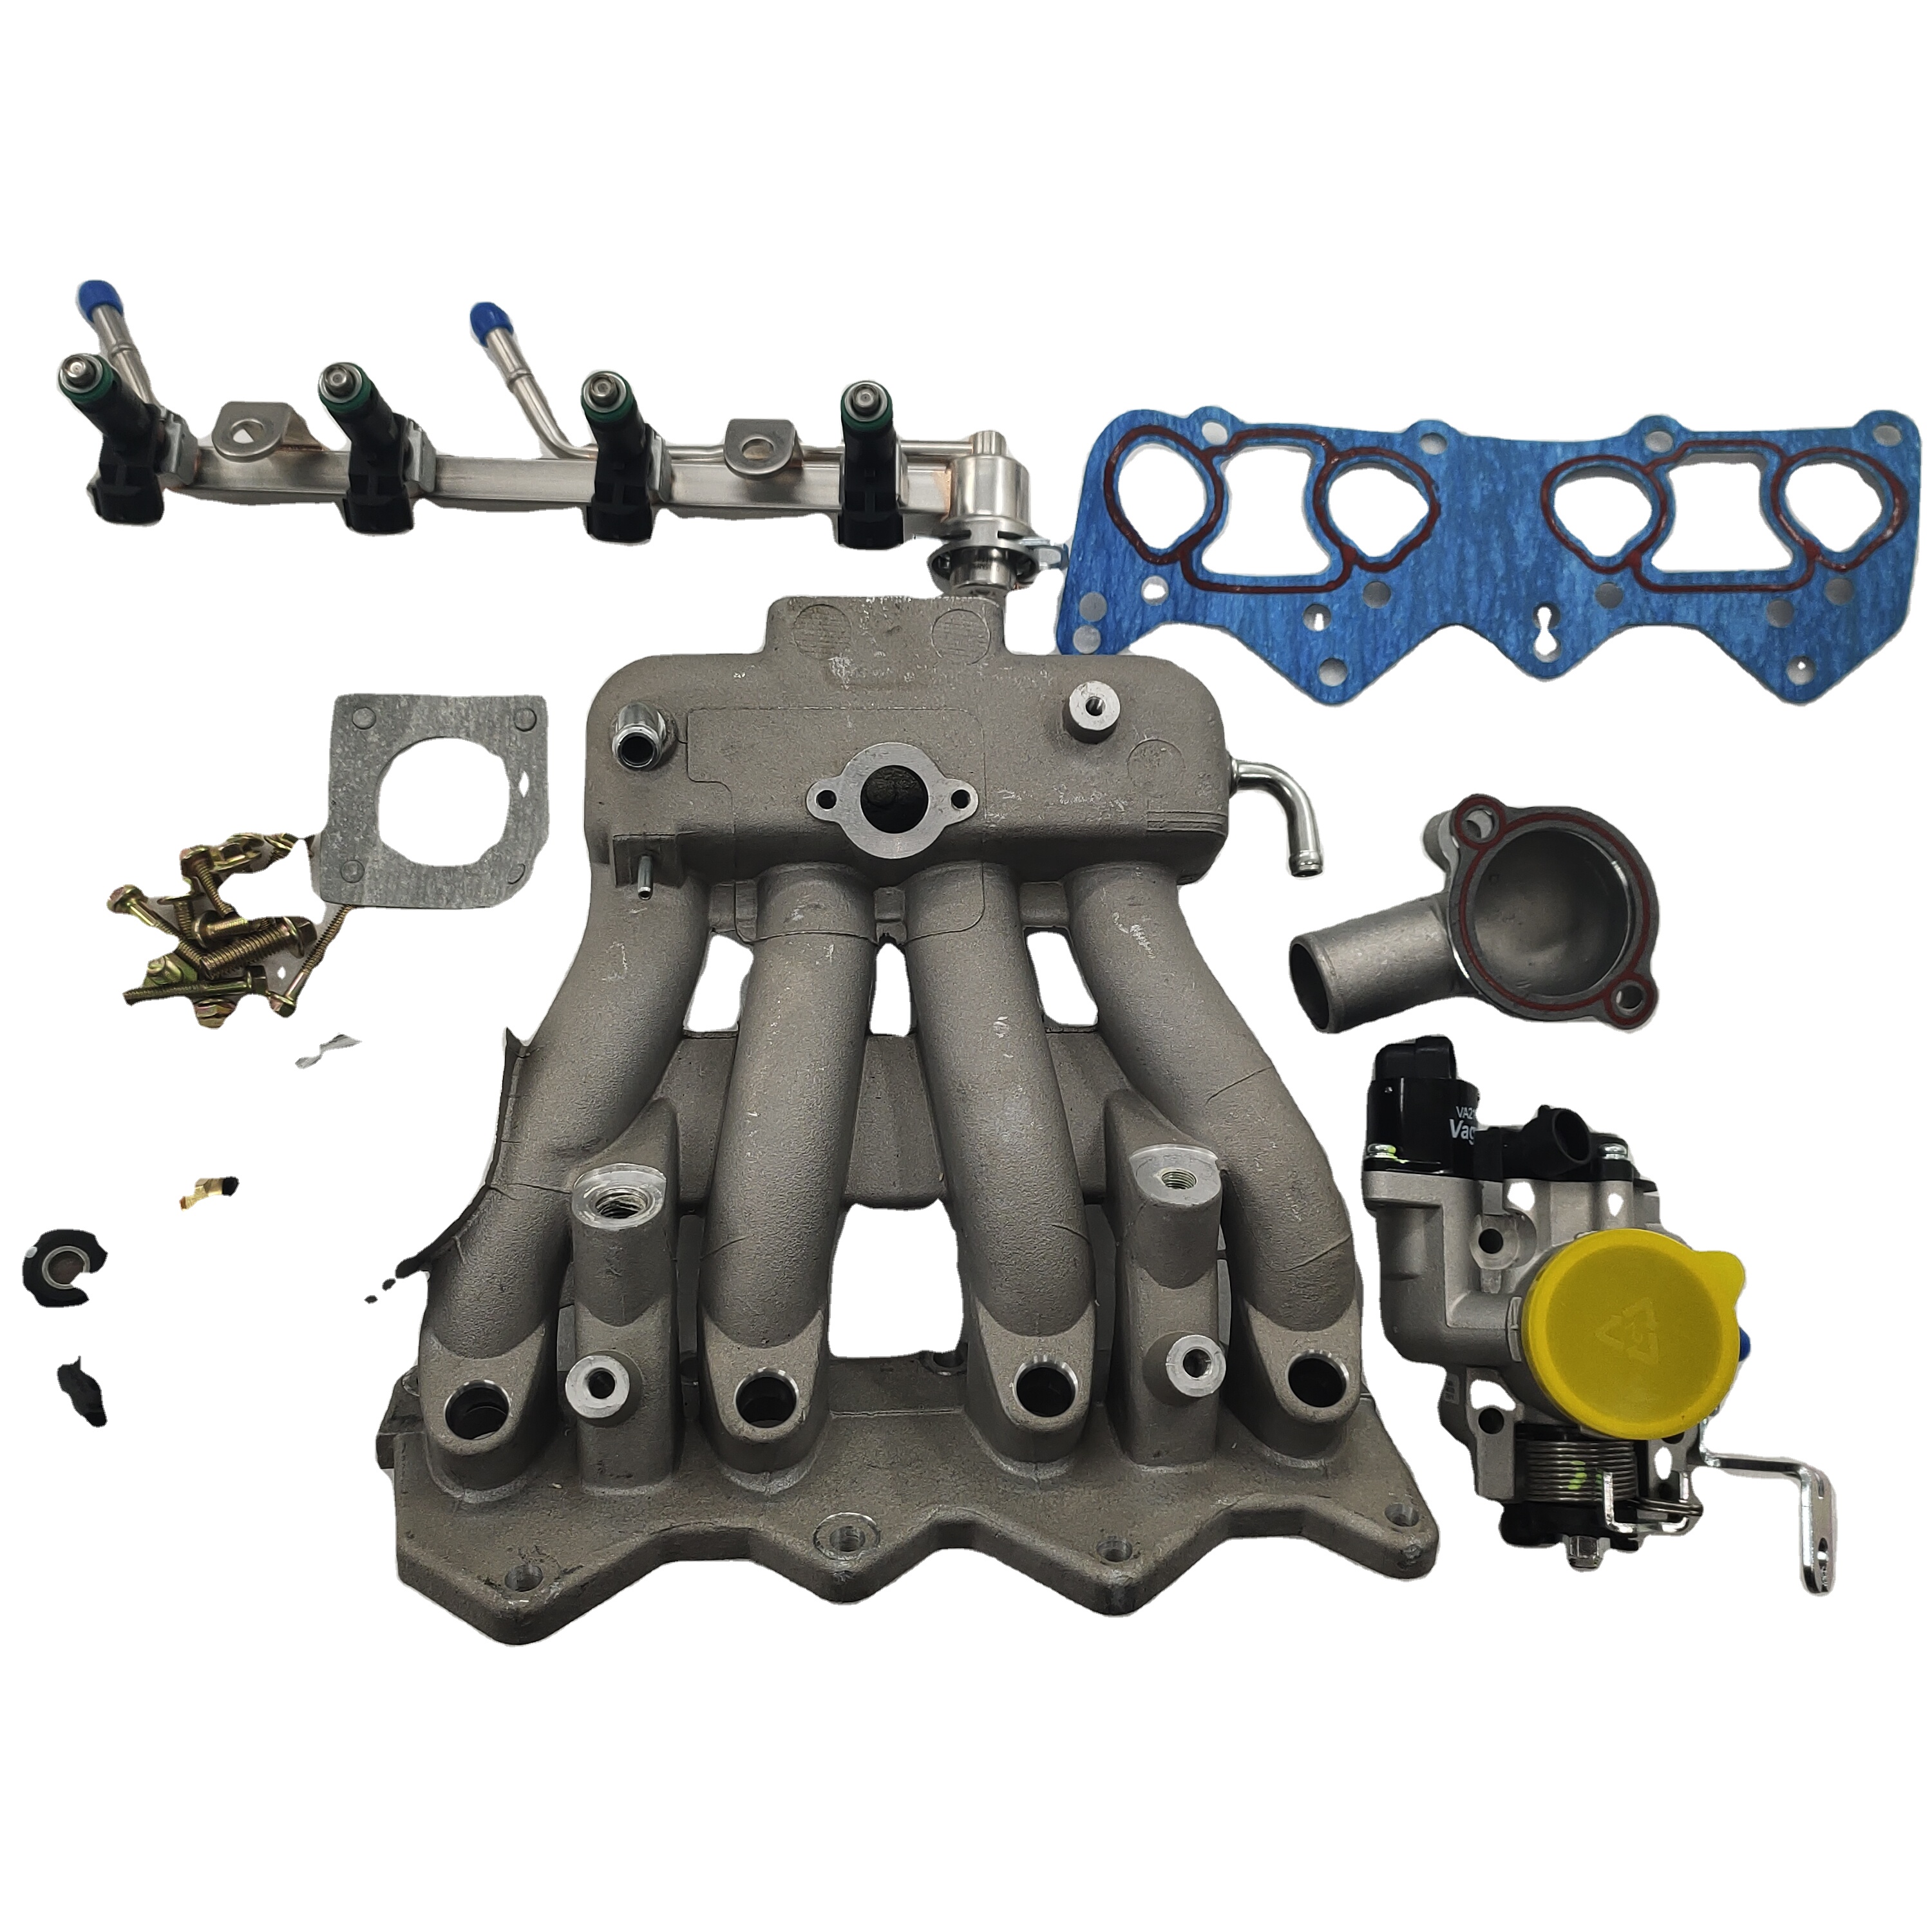 Dayang Tricycle Car engine parts original parts 800cc water-cooled intake manifold assembly